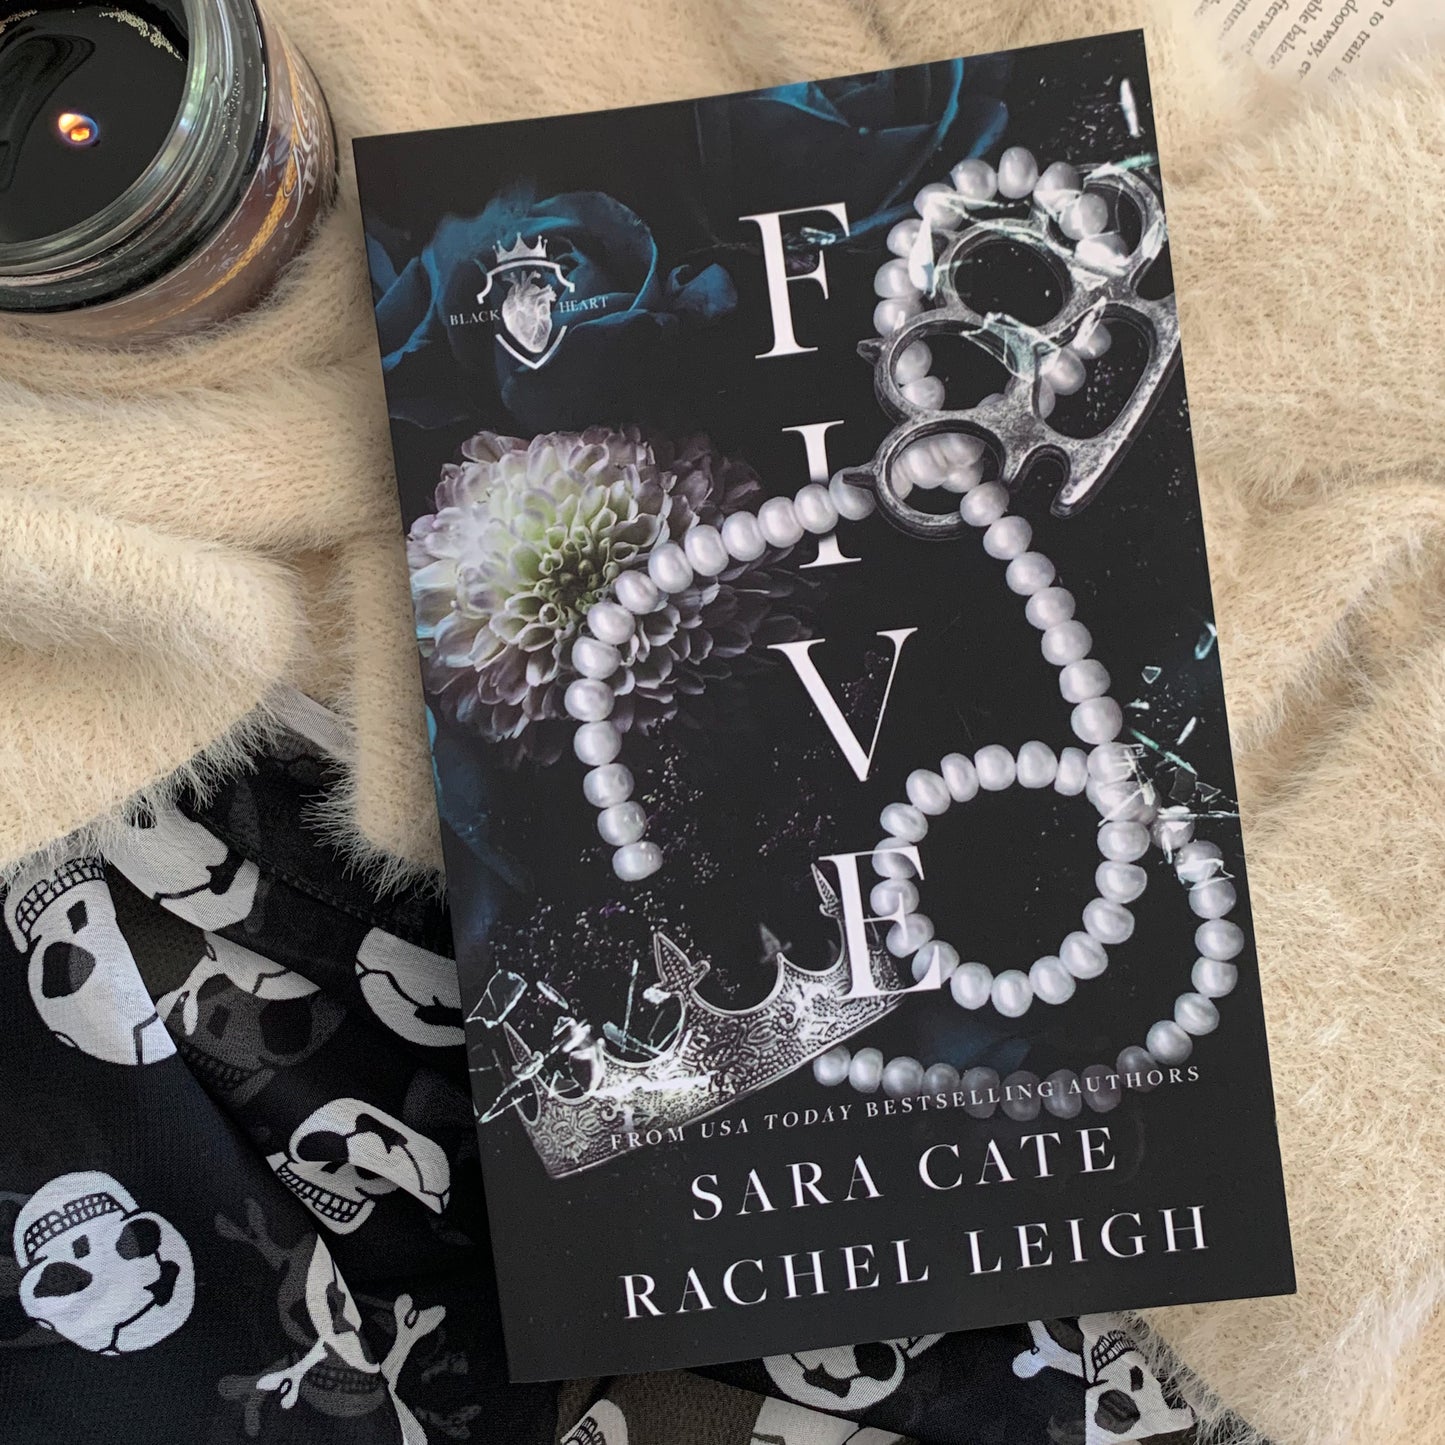 Black Hearts series by Sara Cate and Rachel Leigh